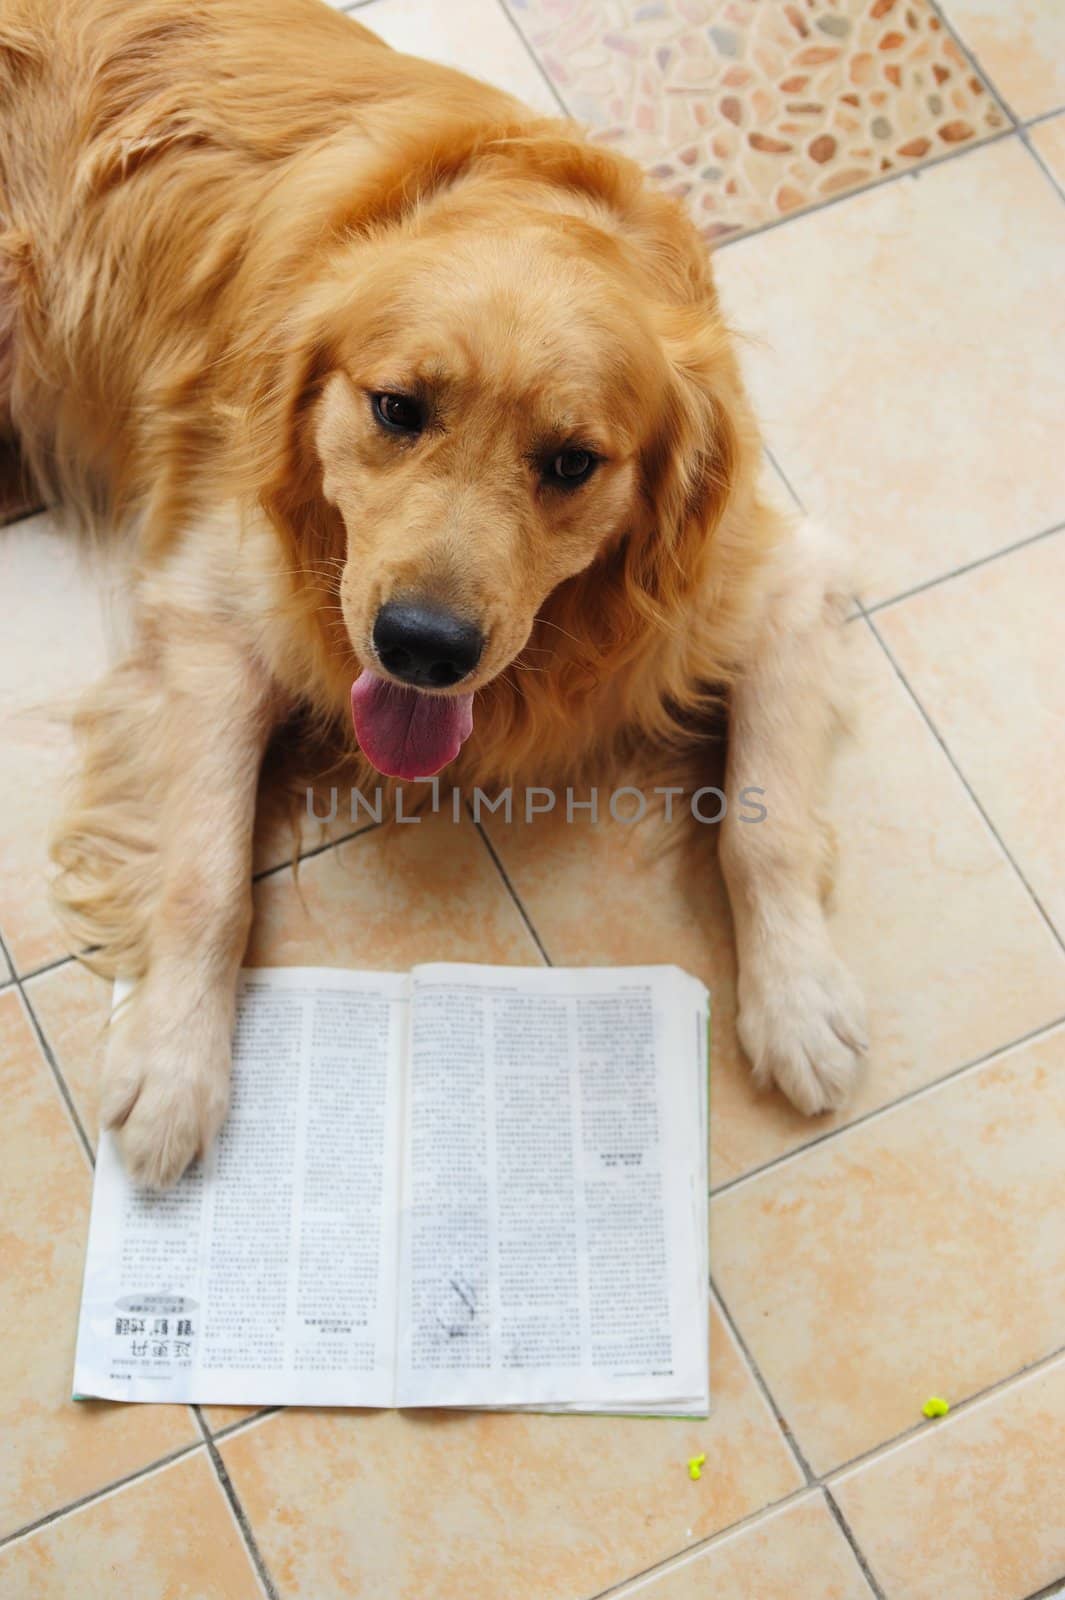 Dog reading book by raywoo